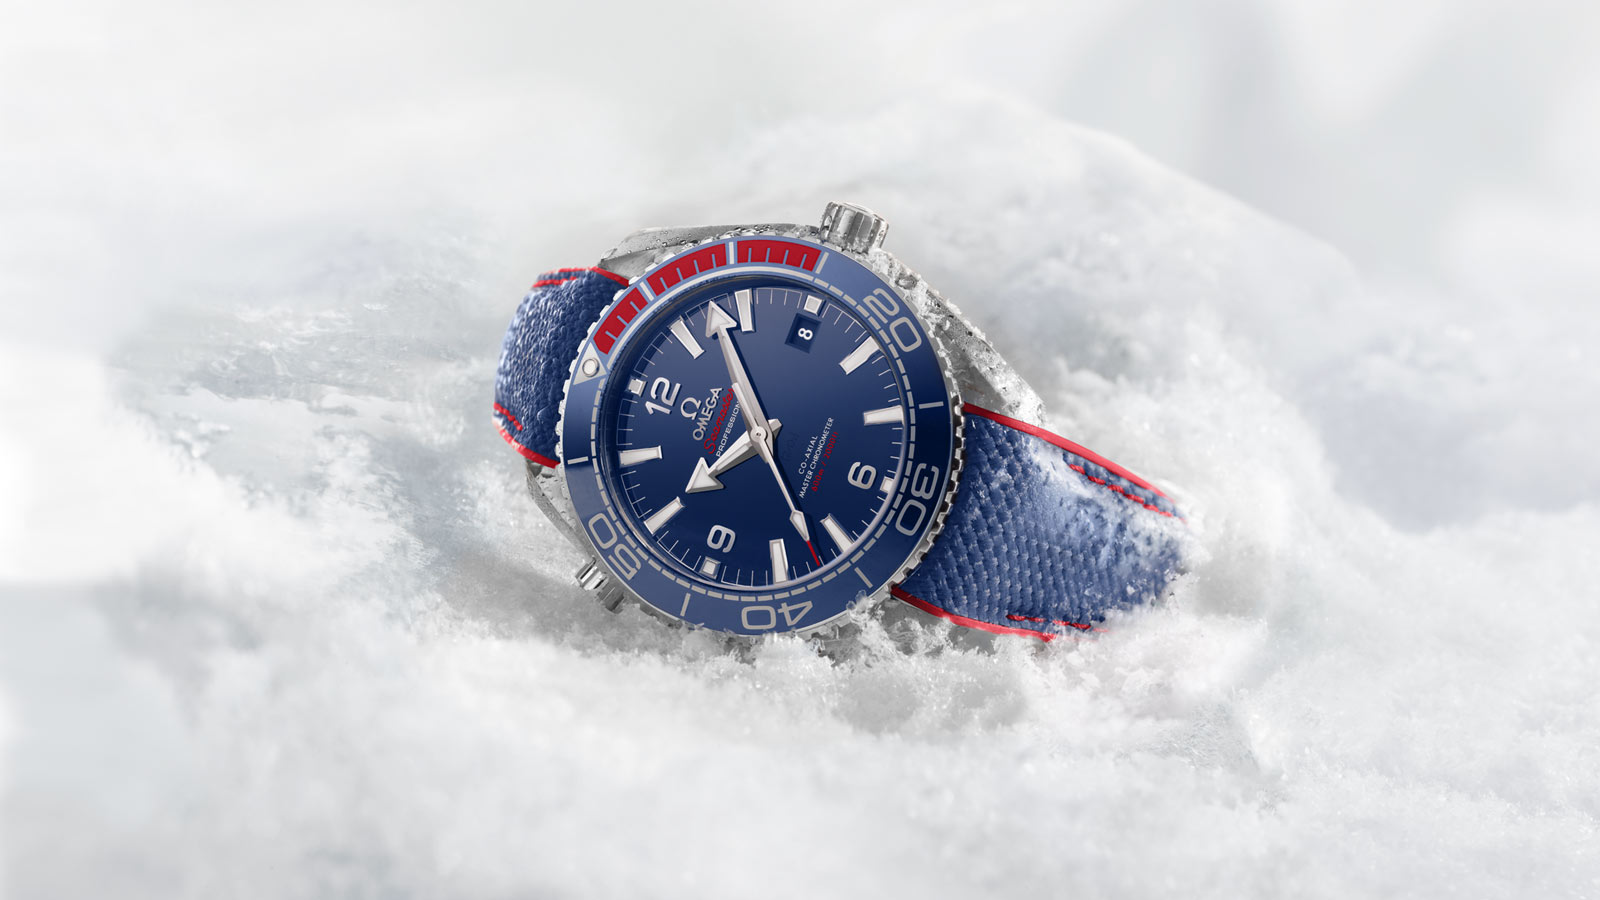 Face Time: Omega counts down to PyeongChang 2018 Olympics with limited edition Seamaster